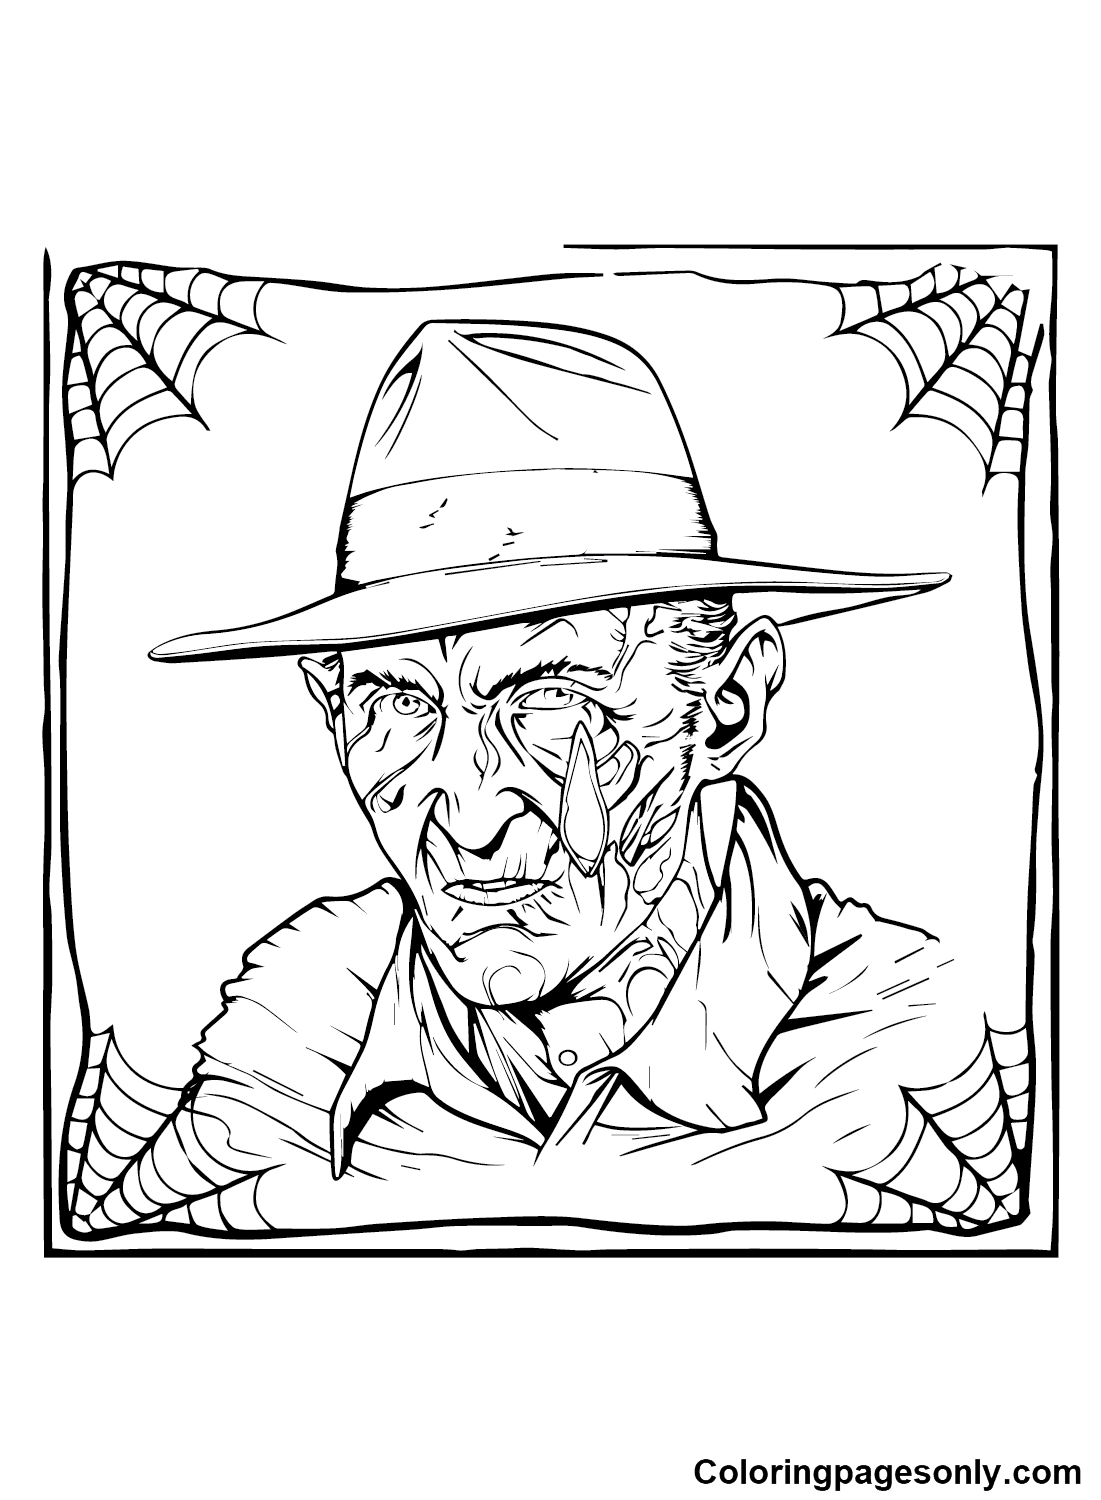 Printable Freddy Krueger Coloring Pages